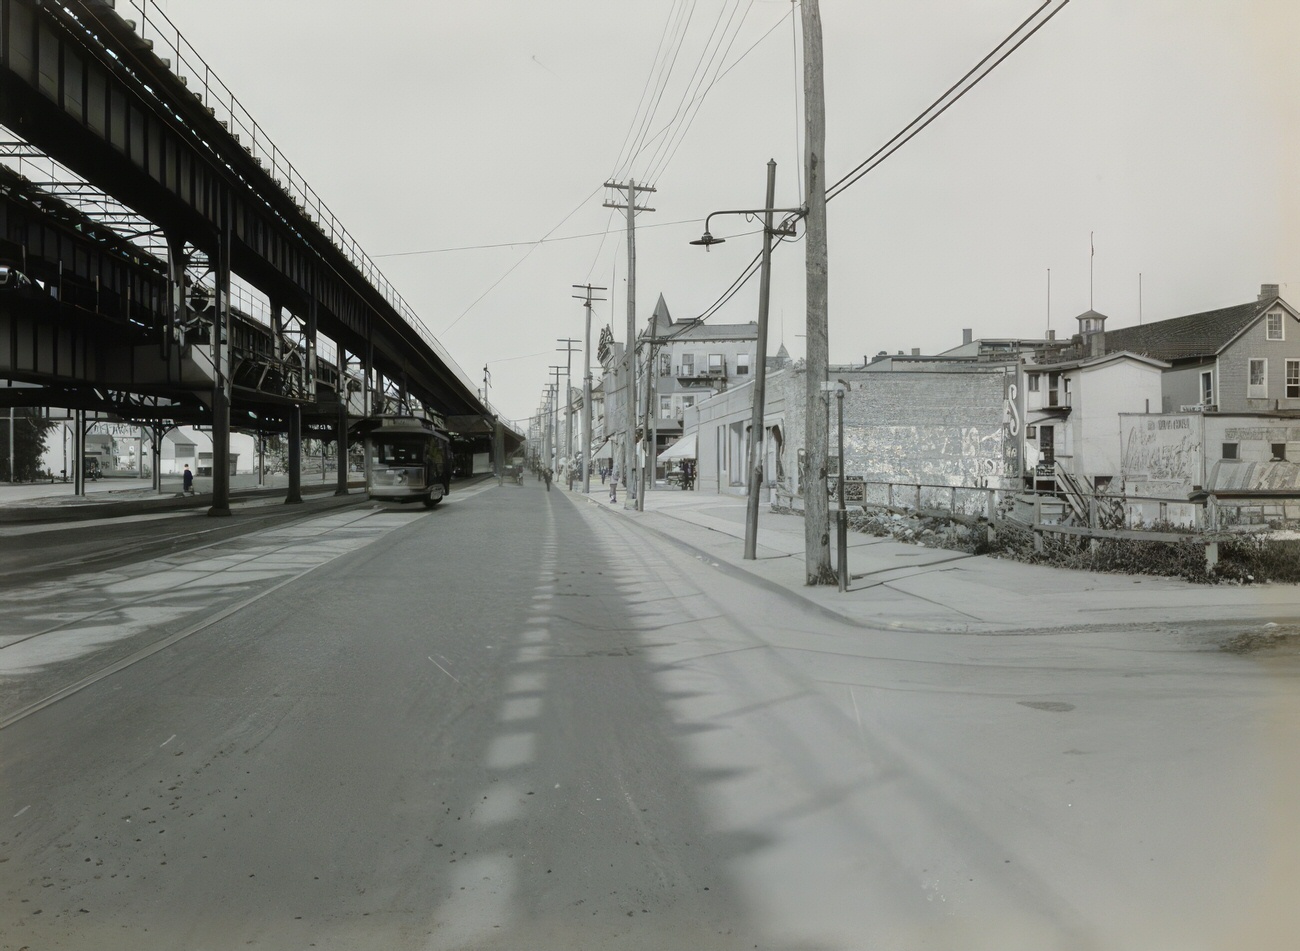 East 213Th Street And White Plains Rd. Intersection With Elevated Tracks, Circa 1915.